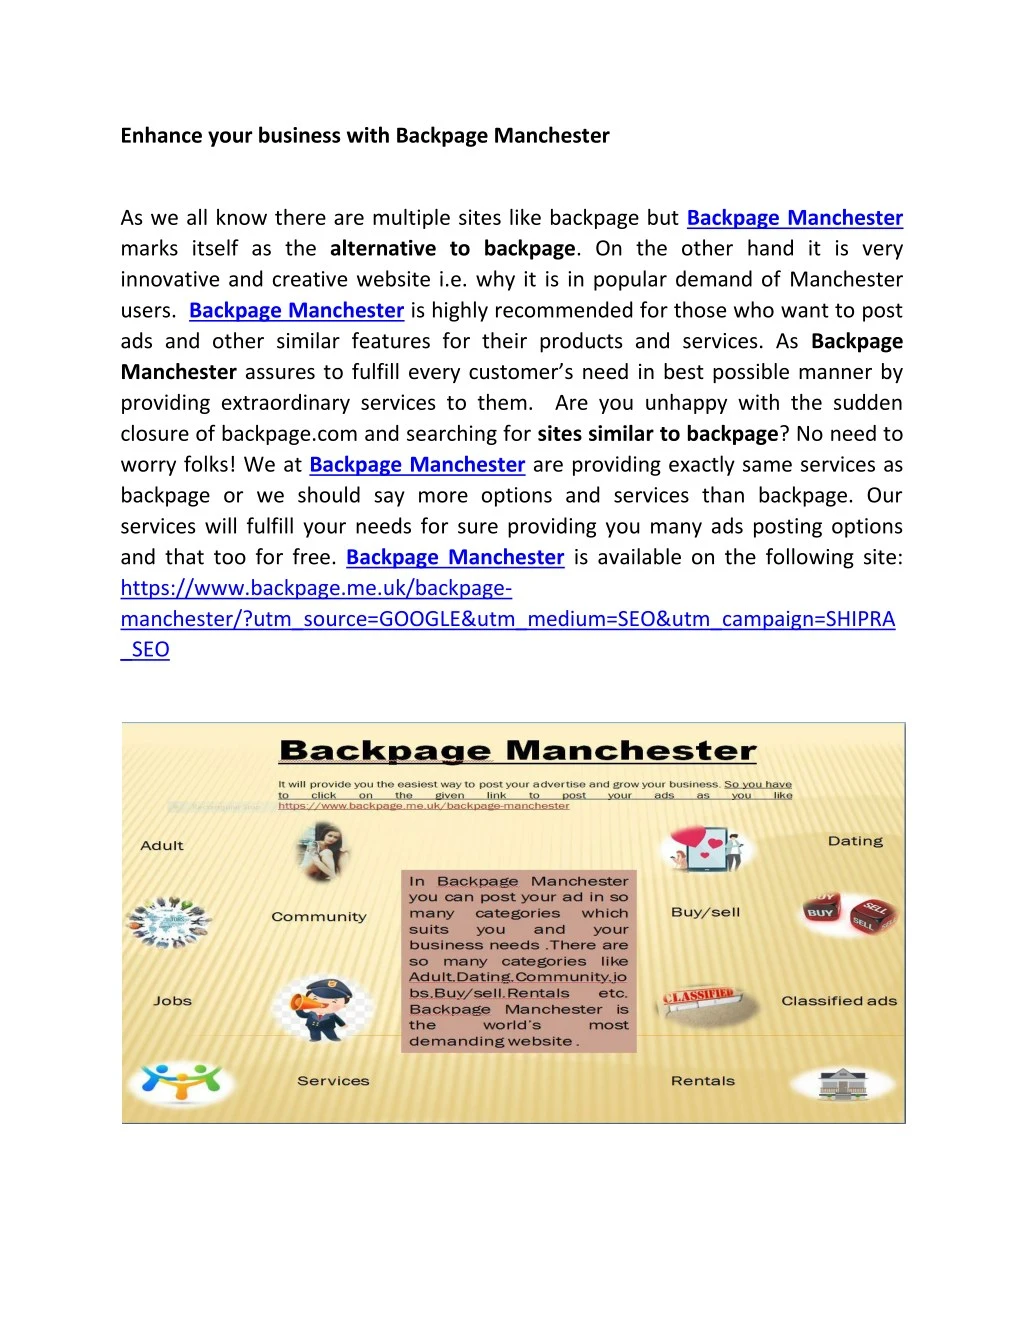 enhance your business with backpage manchester